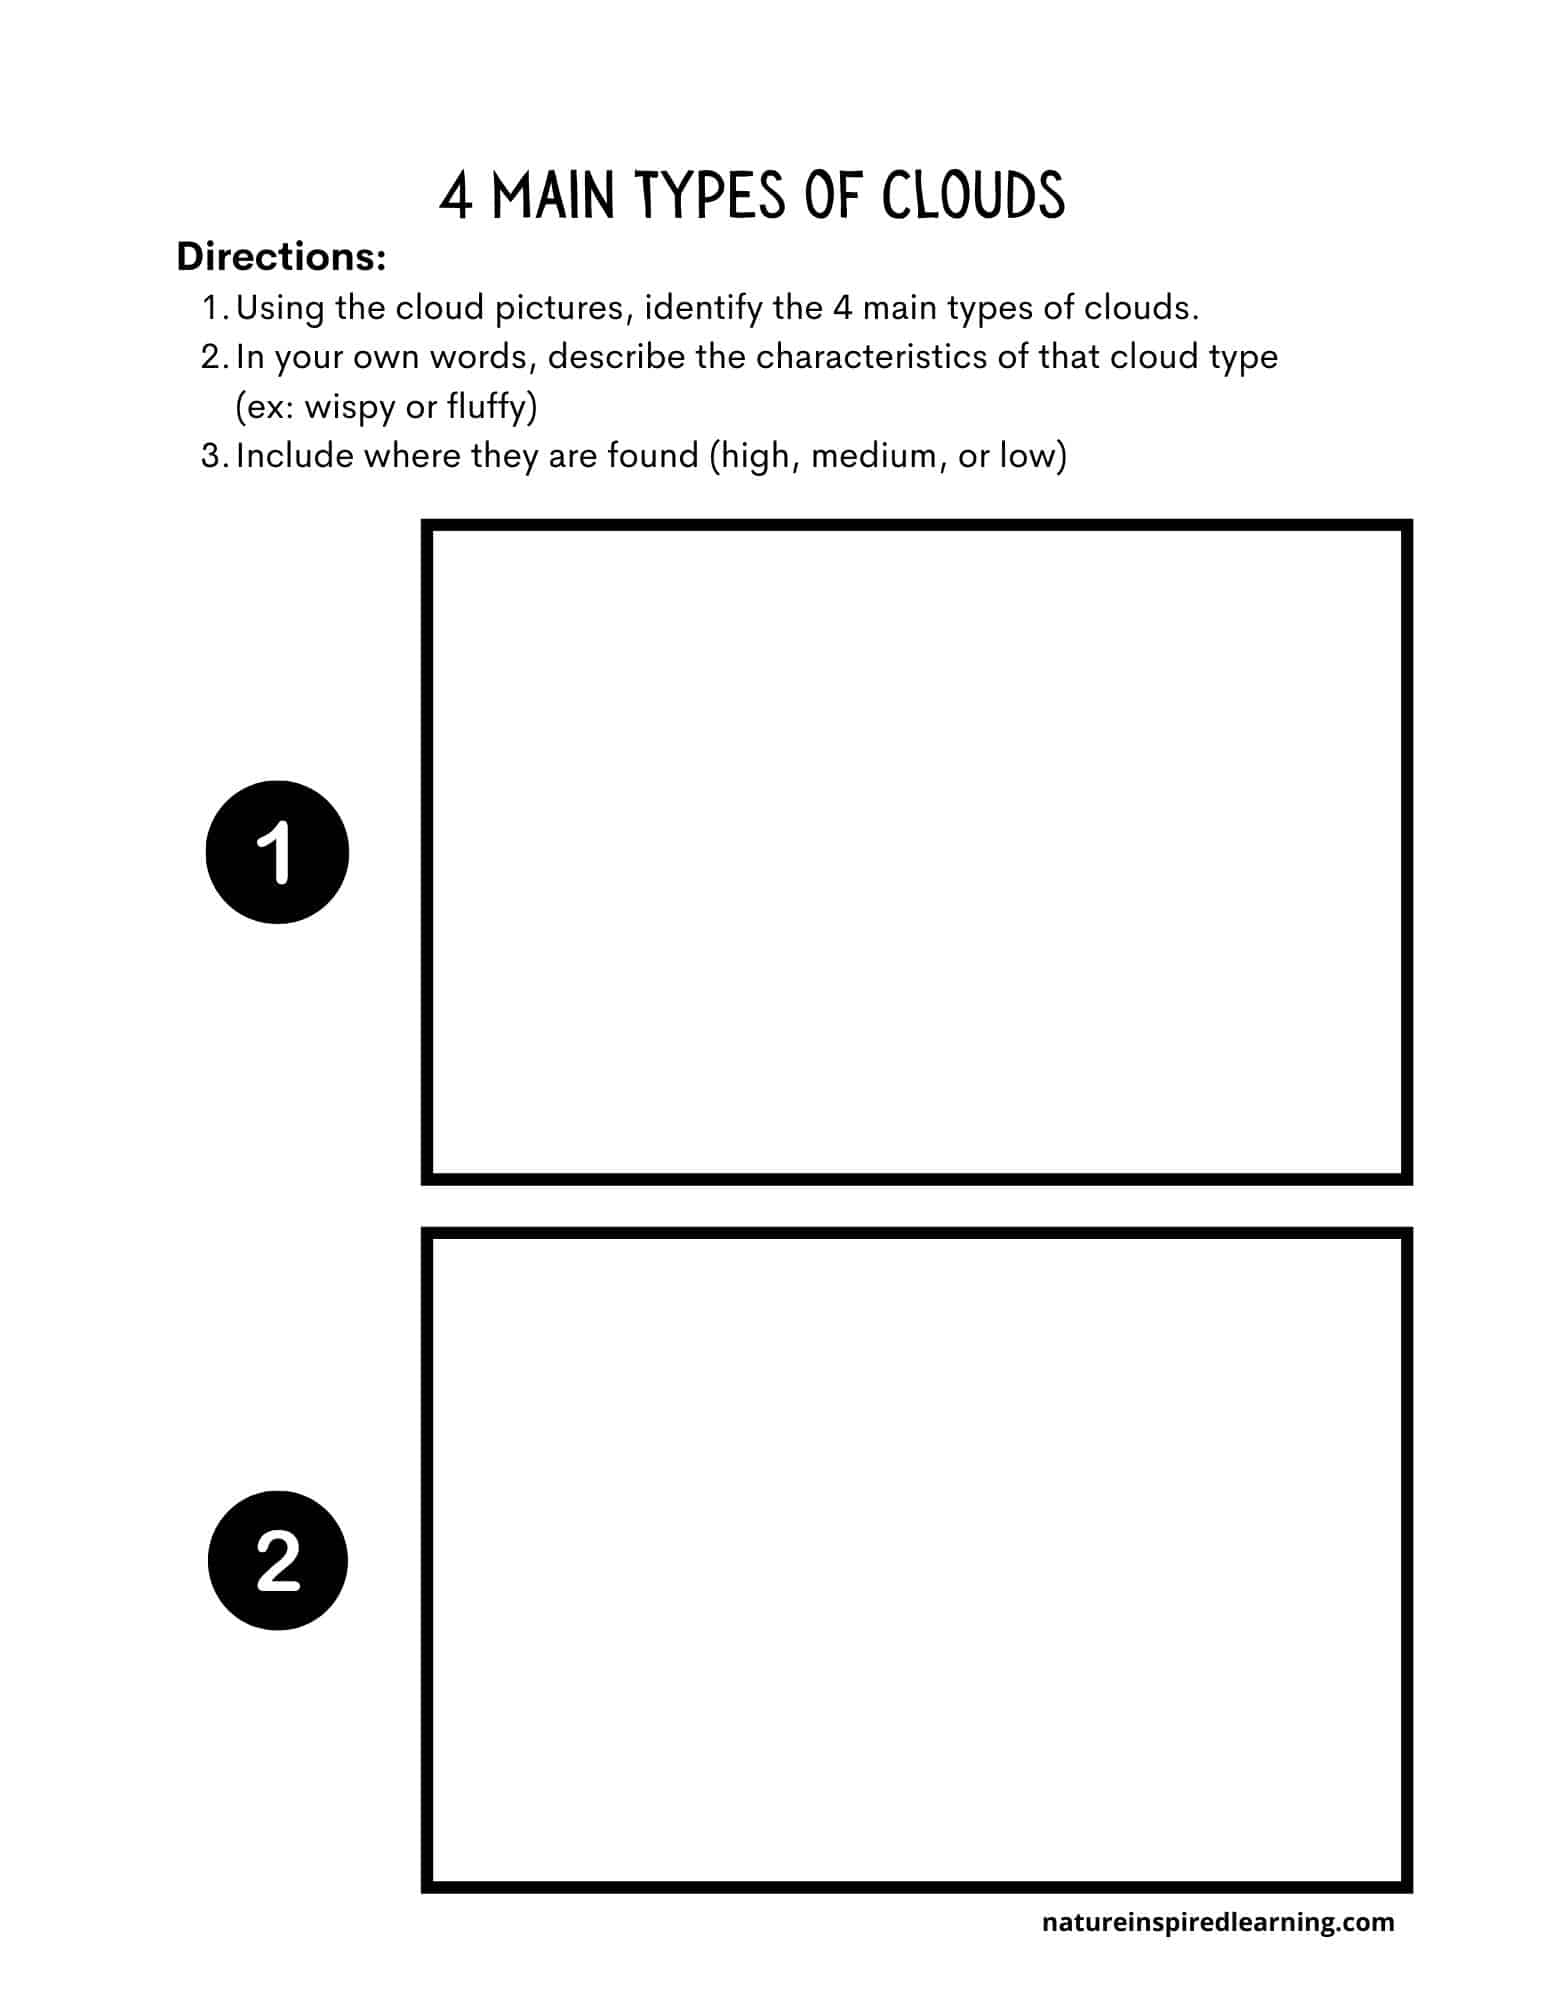 Types of Clouds Printables, Worksheets, and Activities